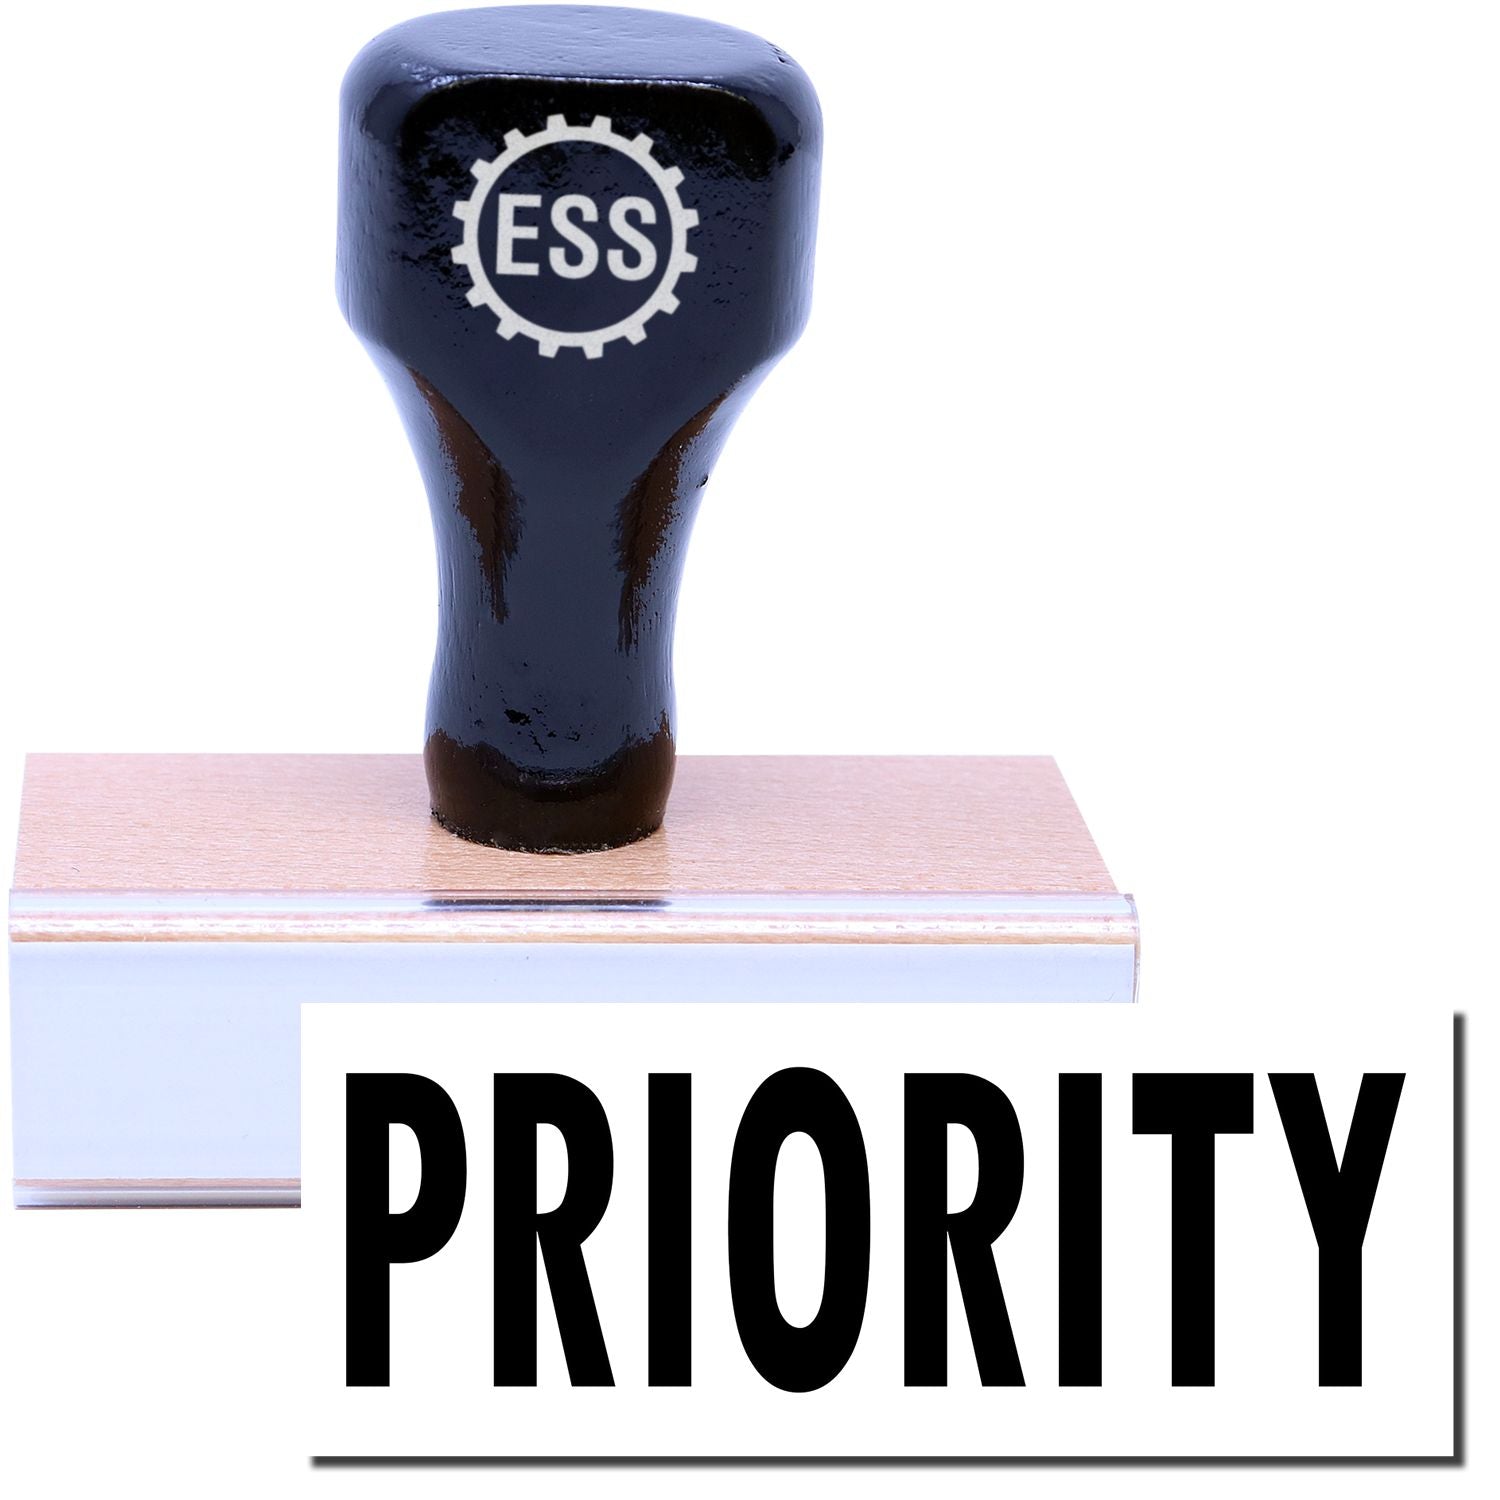 A stock office rubber stamp with a stamped image showing how the text "PRIORITY" in a large font is displayed after stamping.